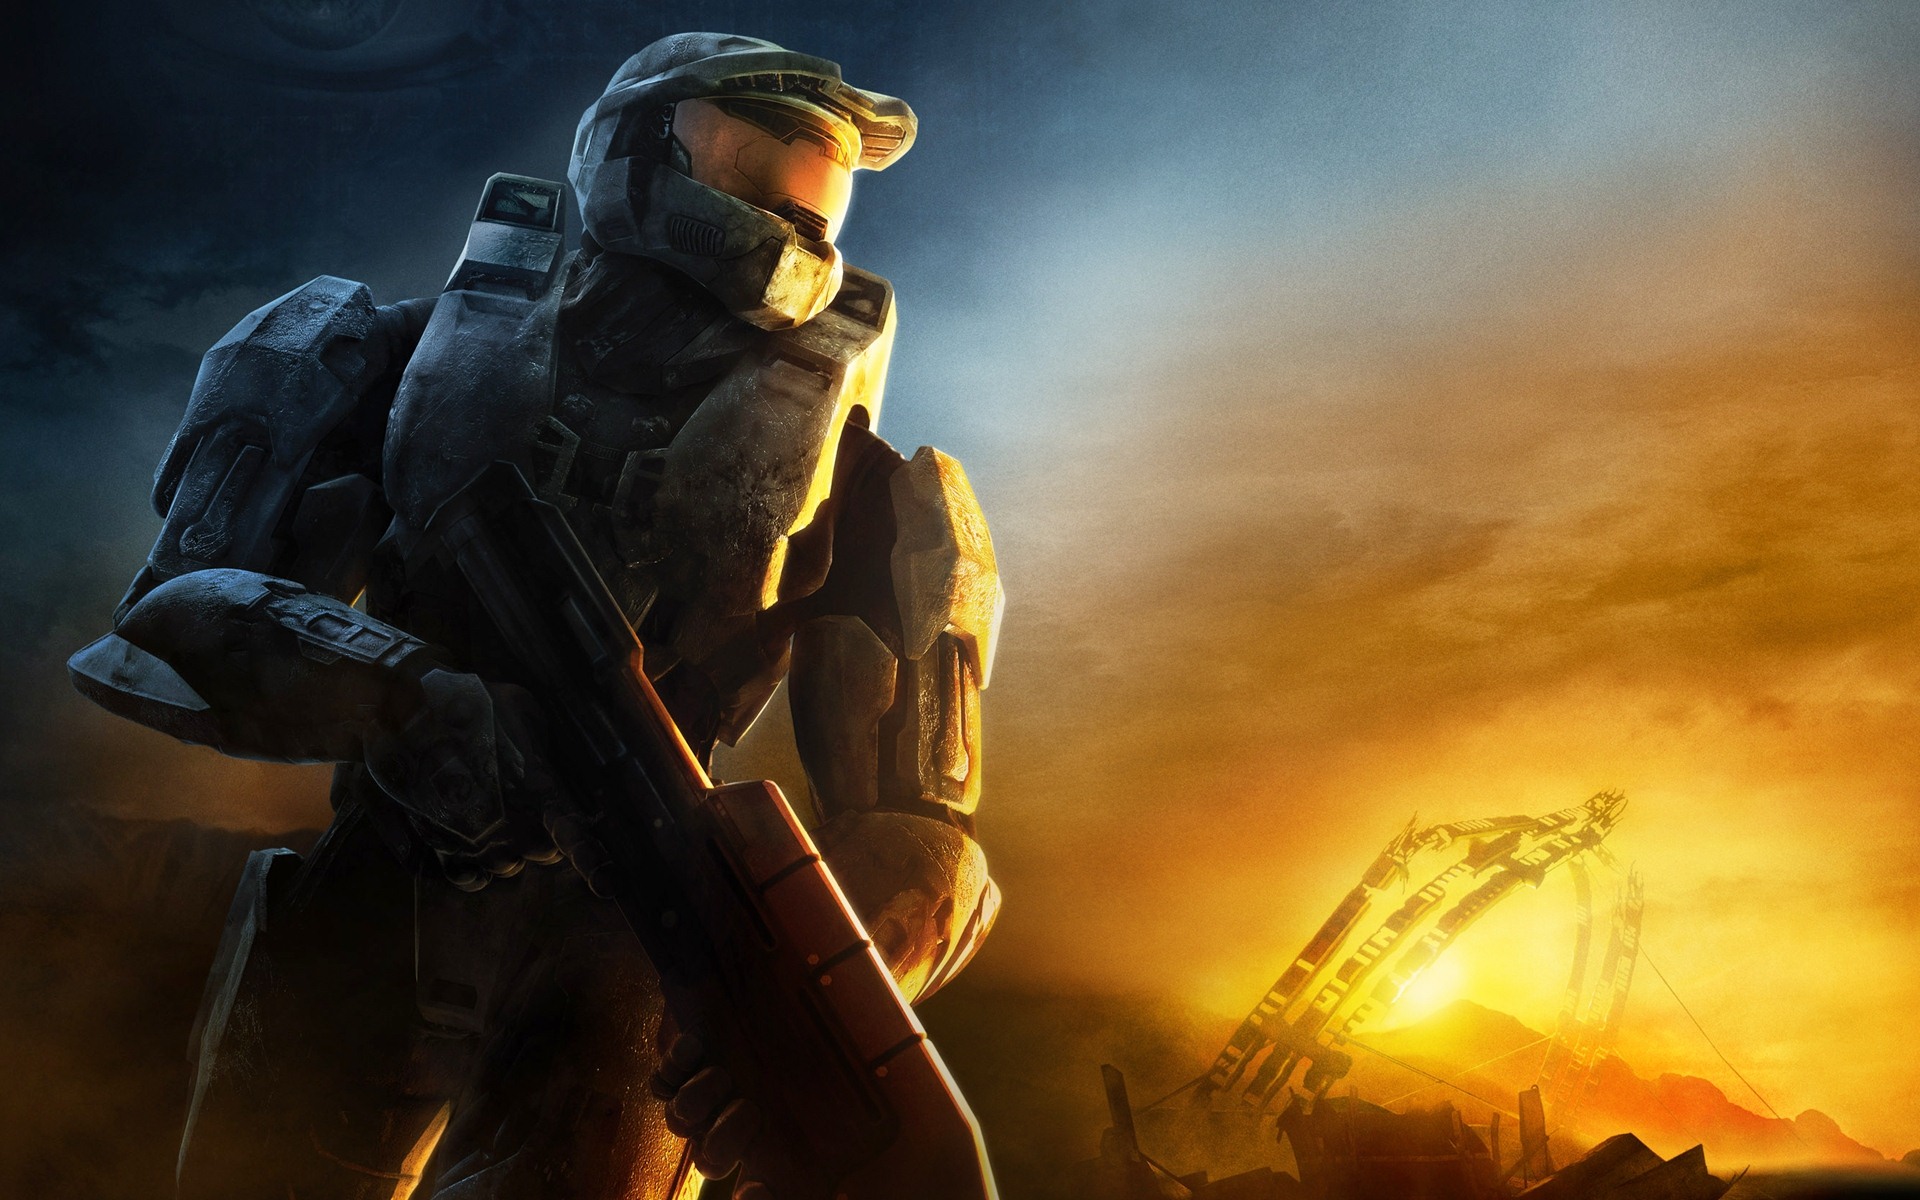 Halo game HD wallpapers #22 - 1920x1200